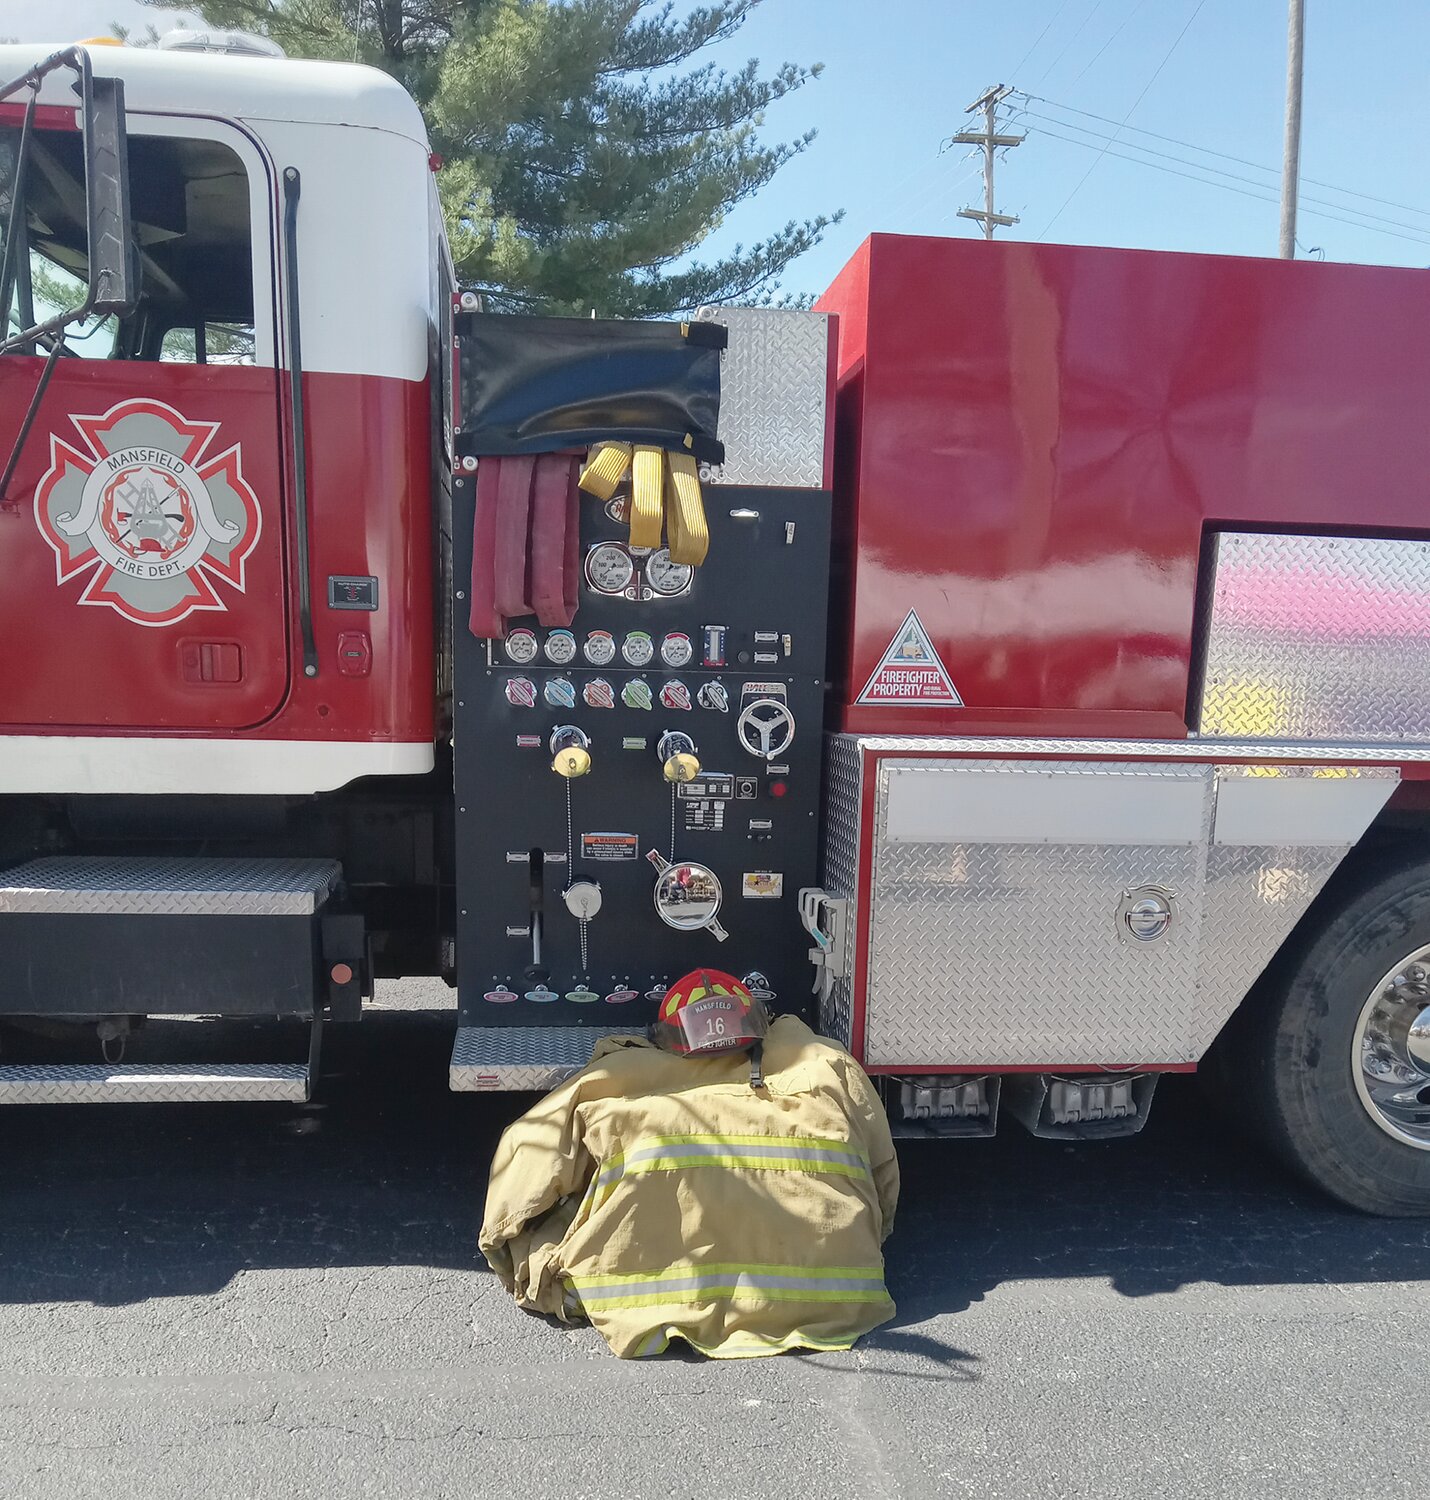 Firefighting equipment was placed alongside a fire truck during the annual “Bark in the Park” event held in Mansfield.